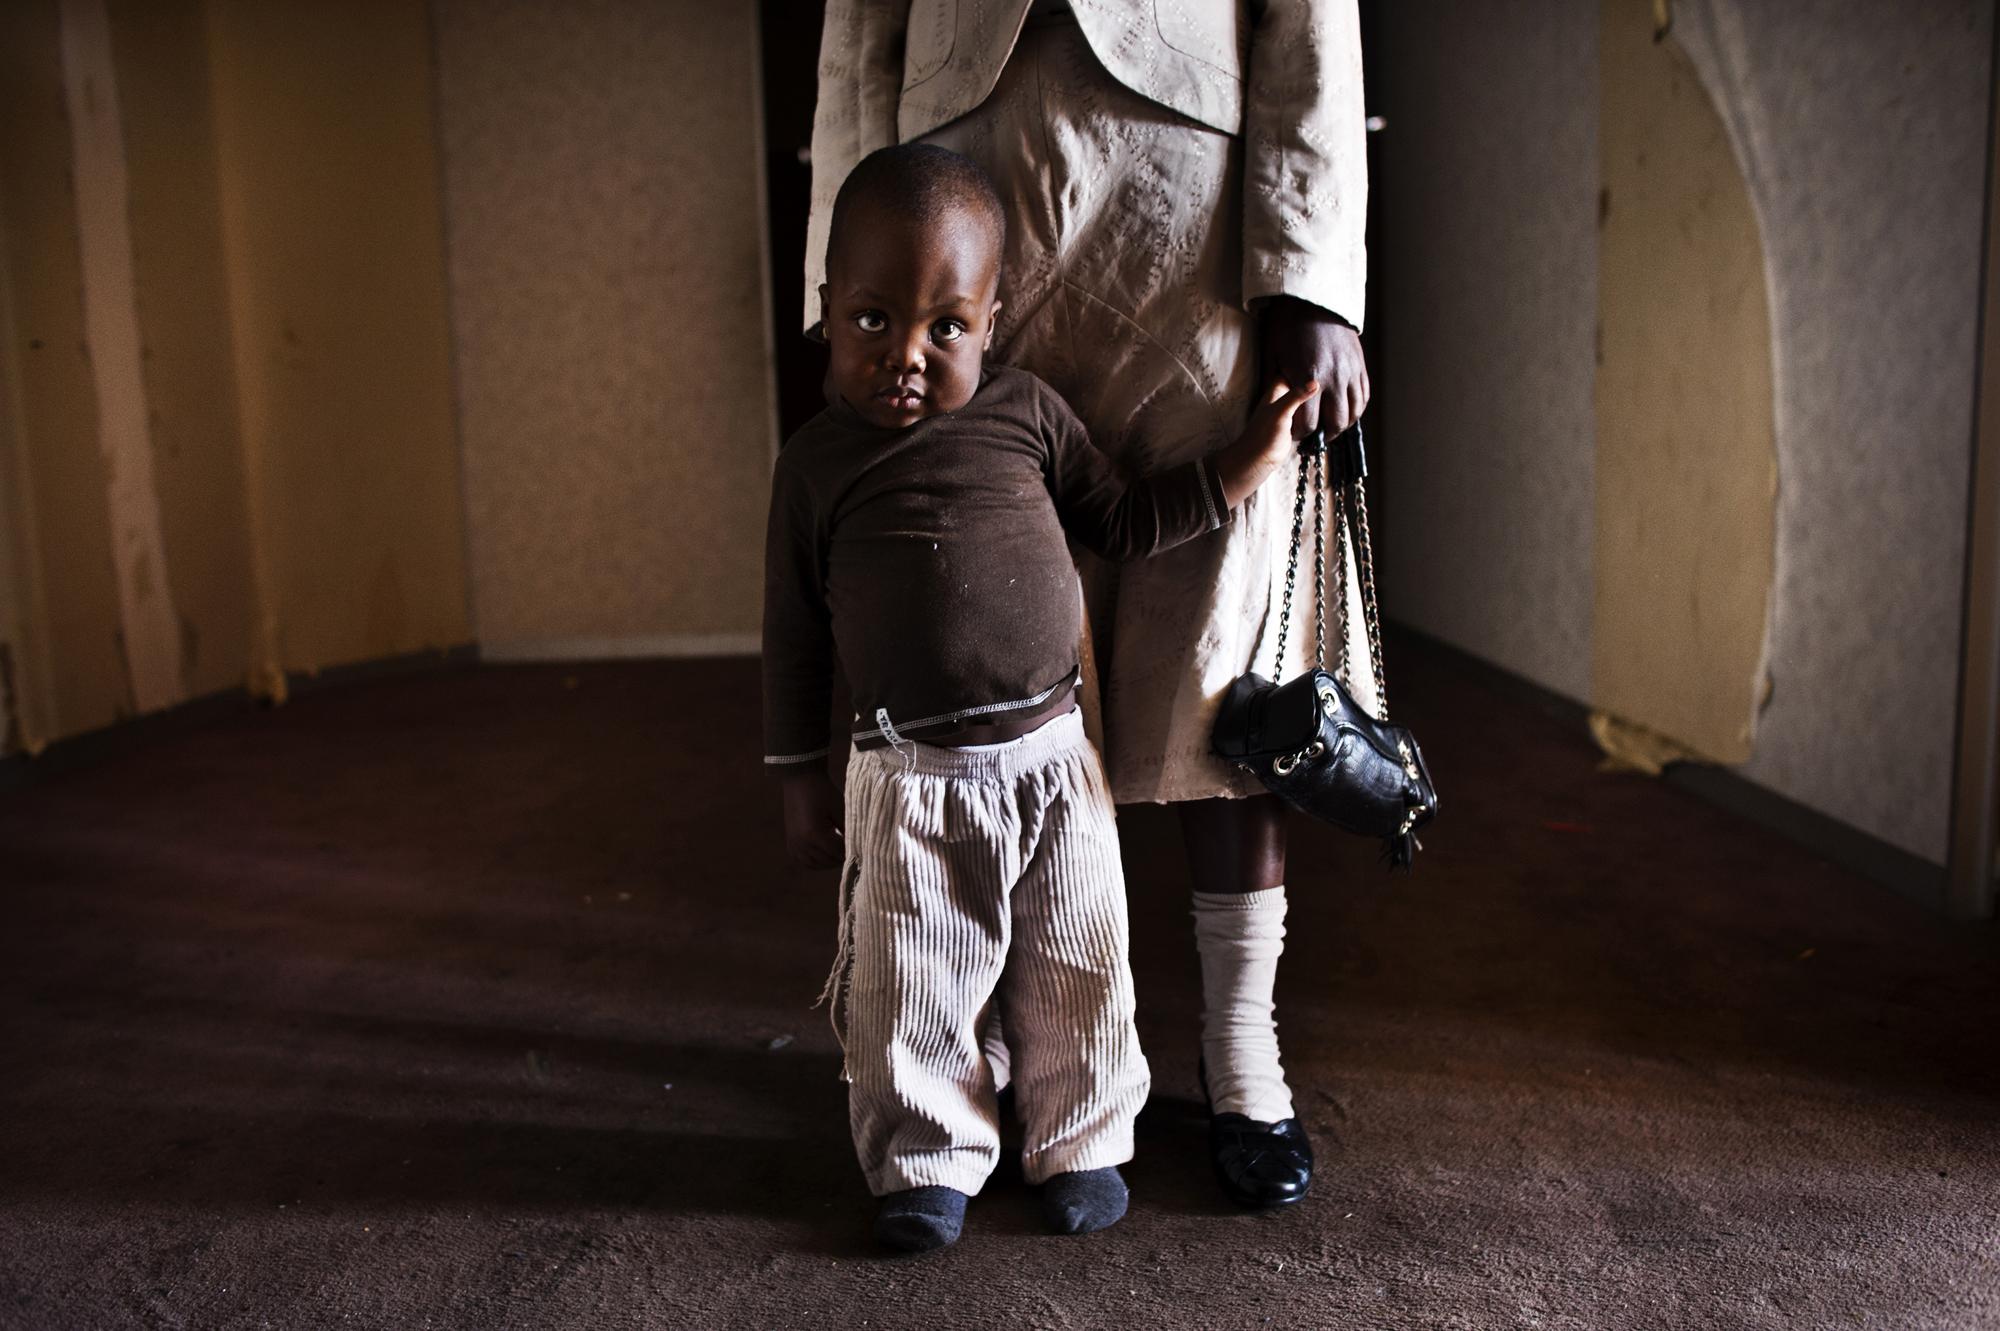 Children of the shadows - Johannesburg, South Africa.June 2012Young boy with his...